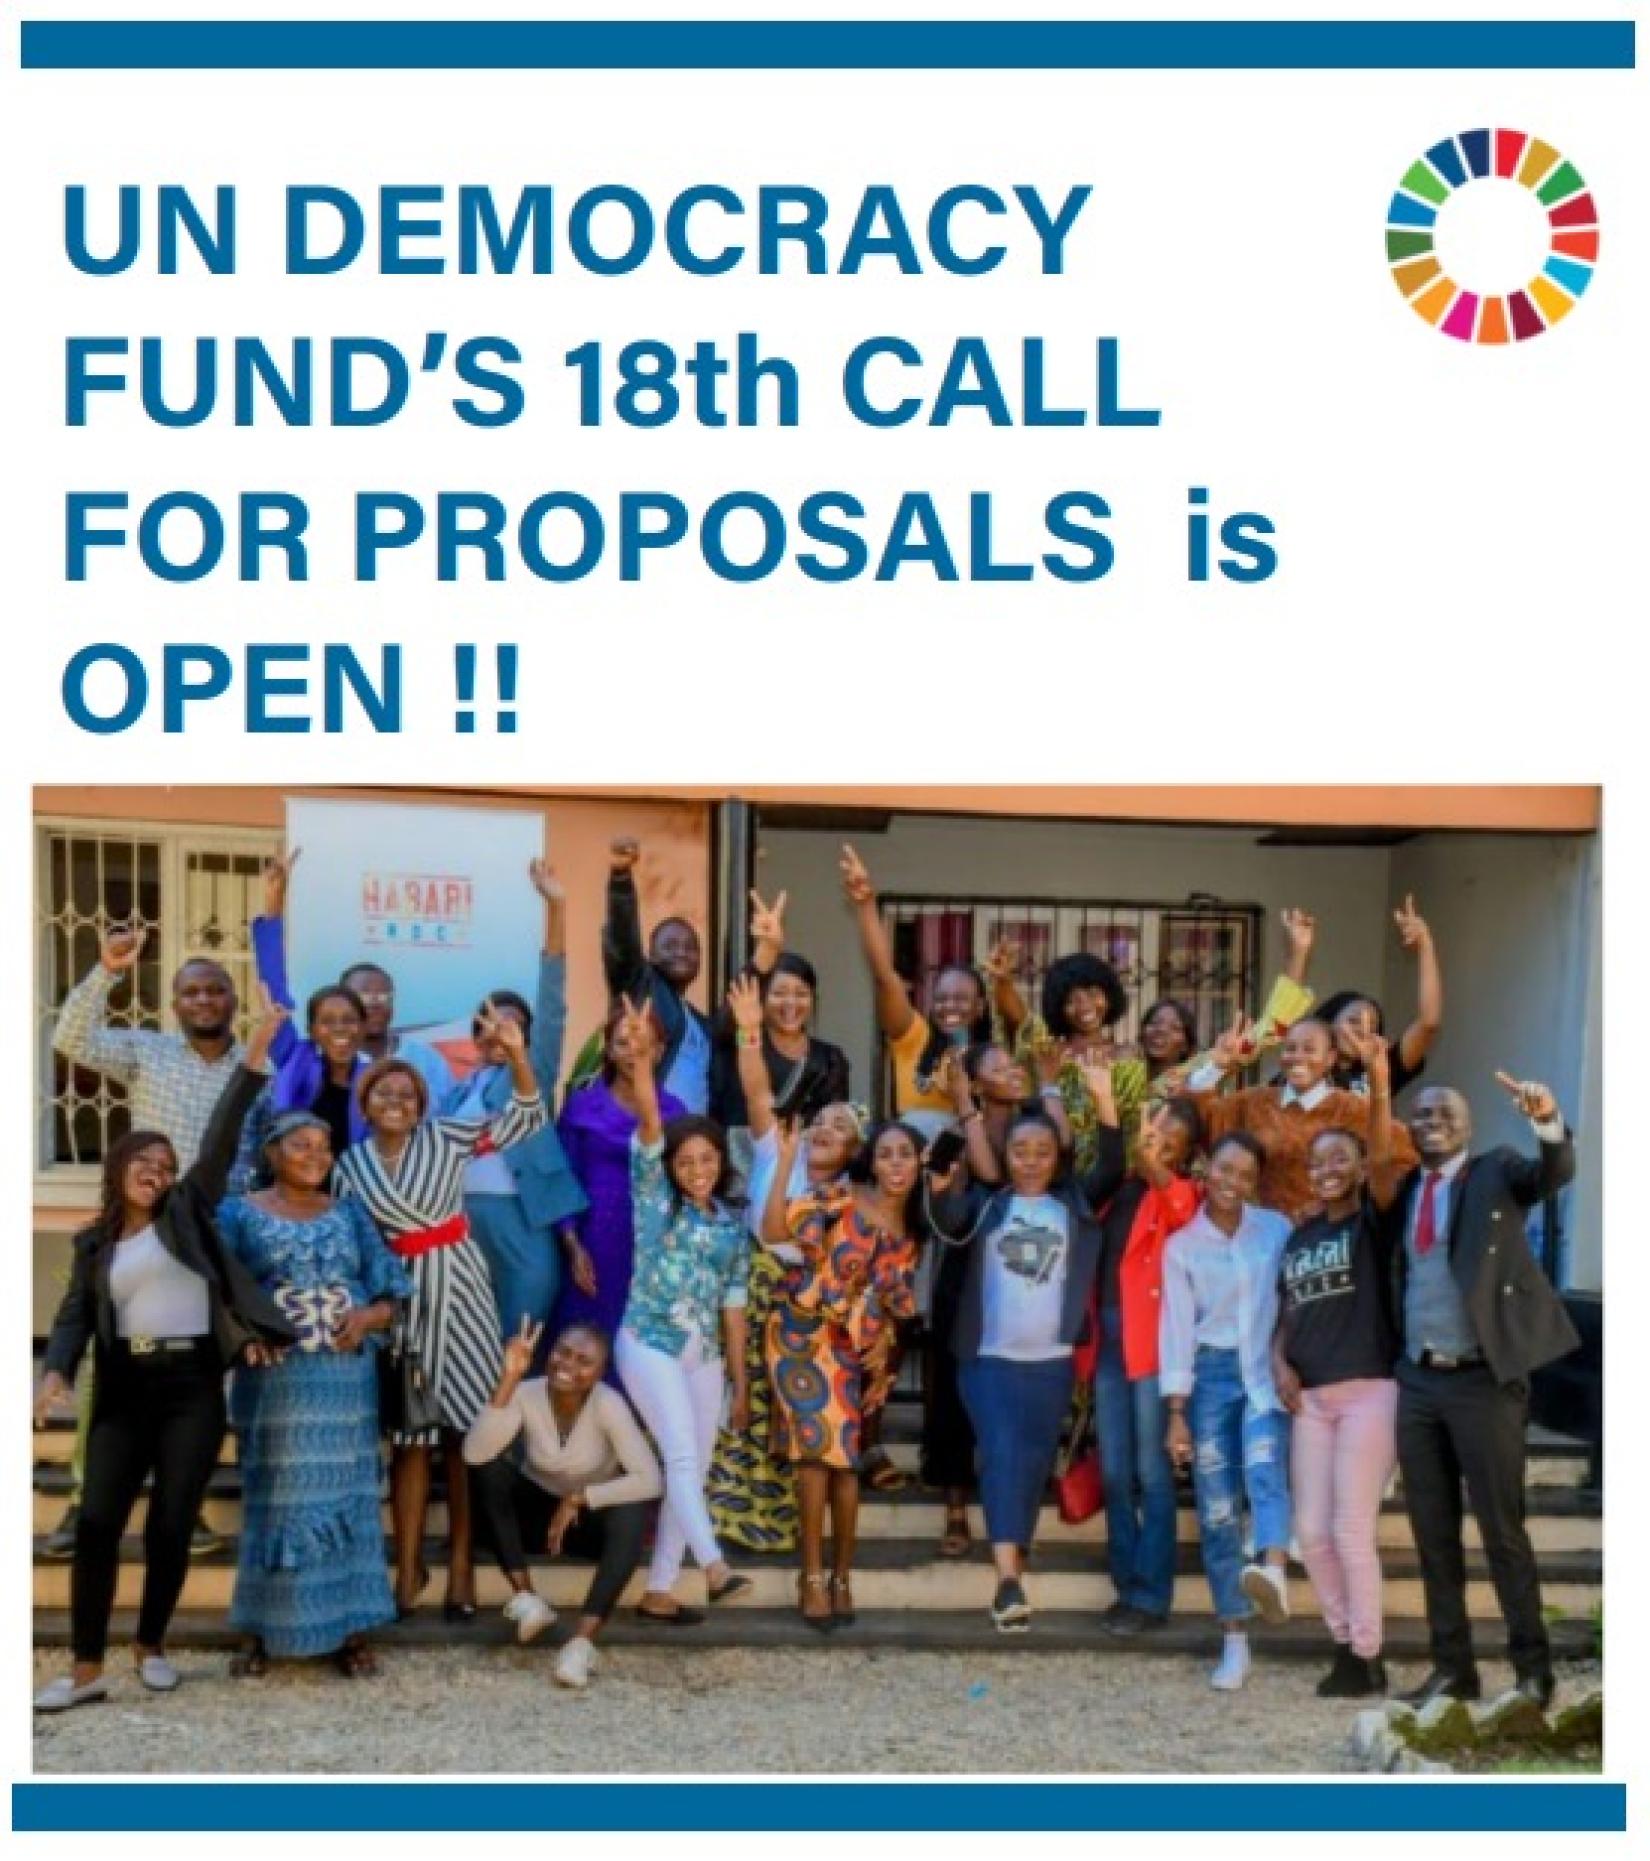 The UN Democracy Fund’s 18th call for proposals is OPEN